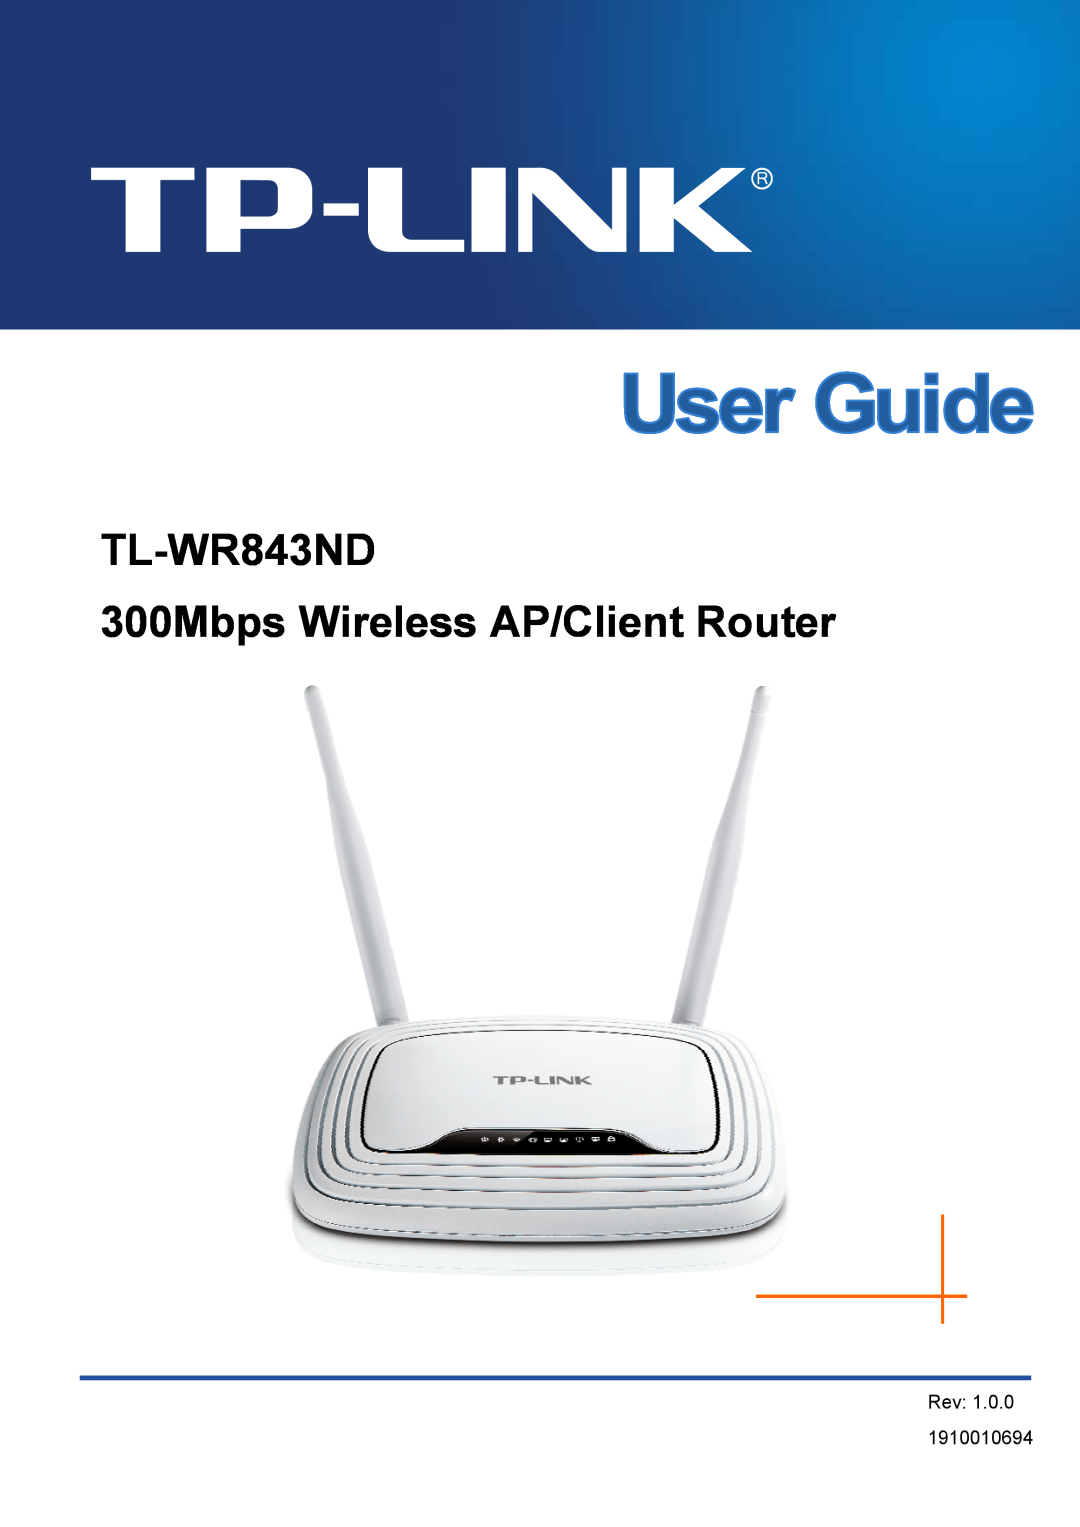 TP-Link manual TL-WR843ND 300Mbps Wireless AP/Client Router, Rev 1.0.0 